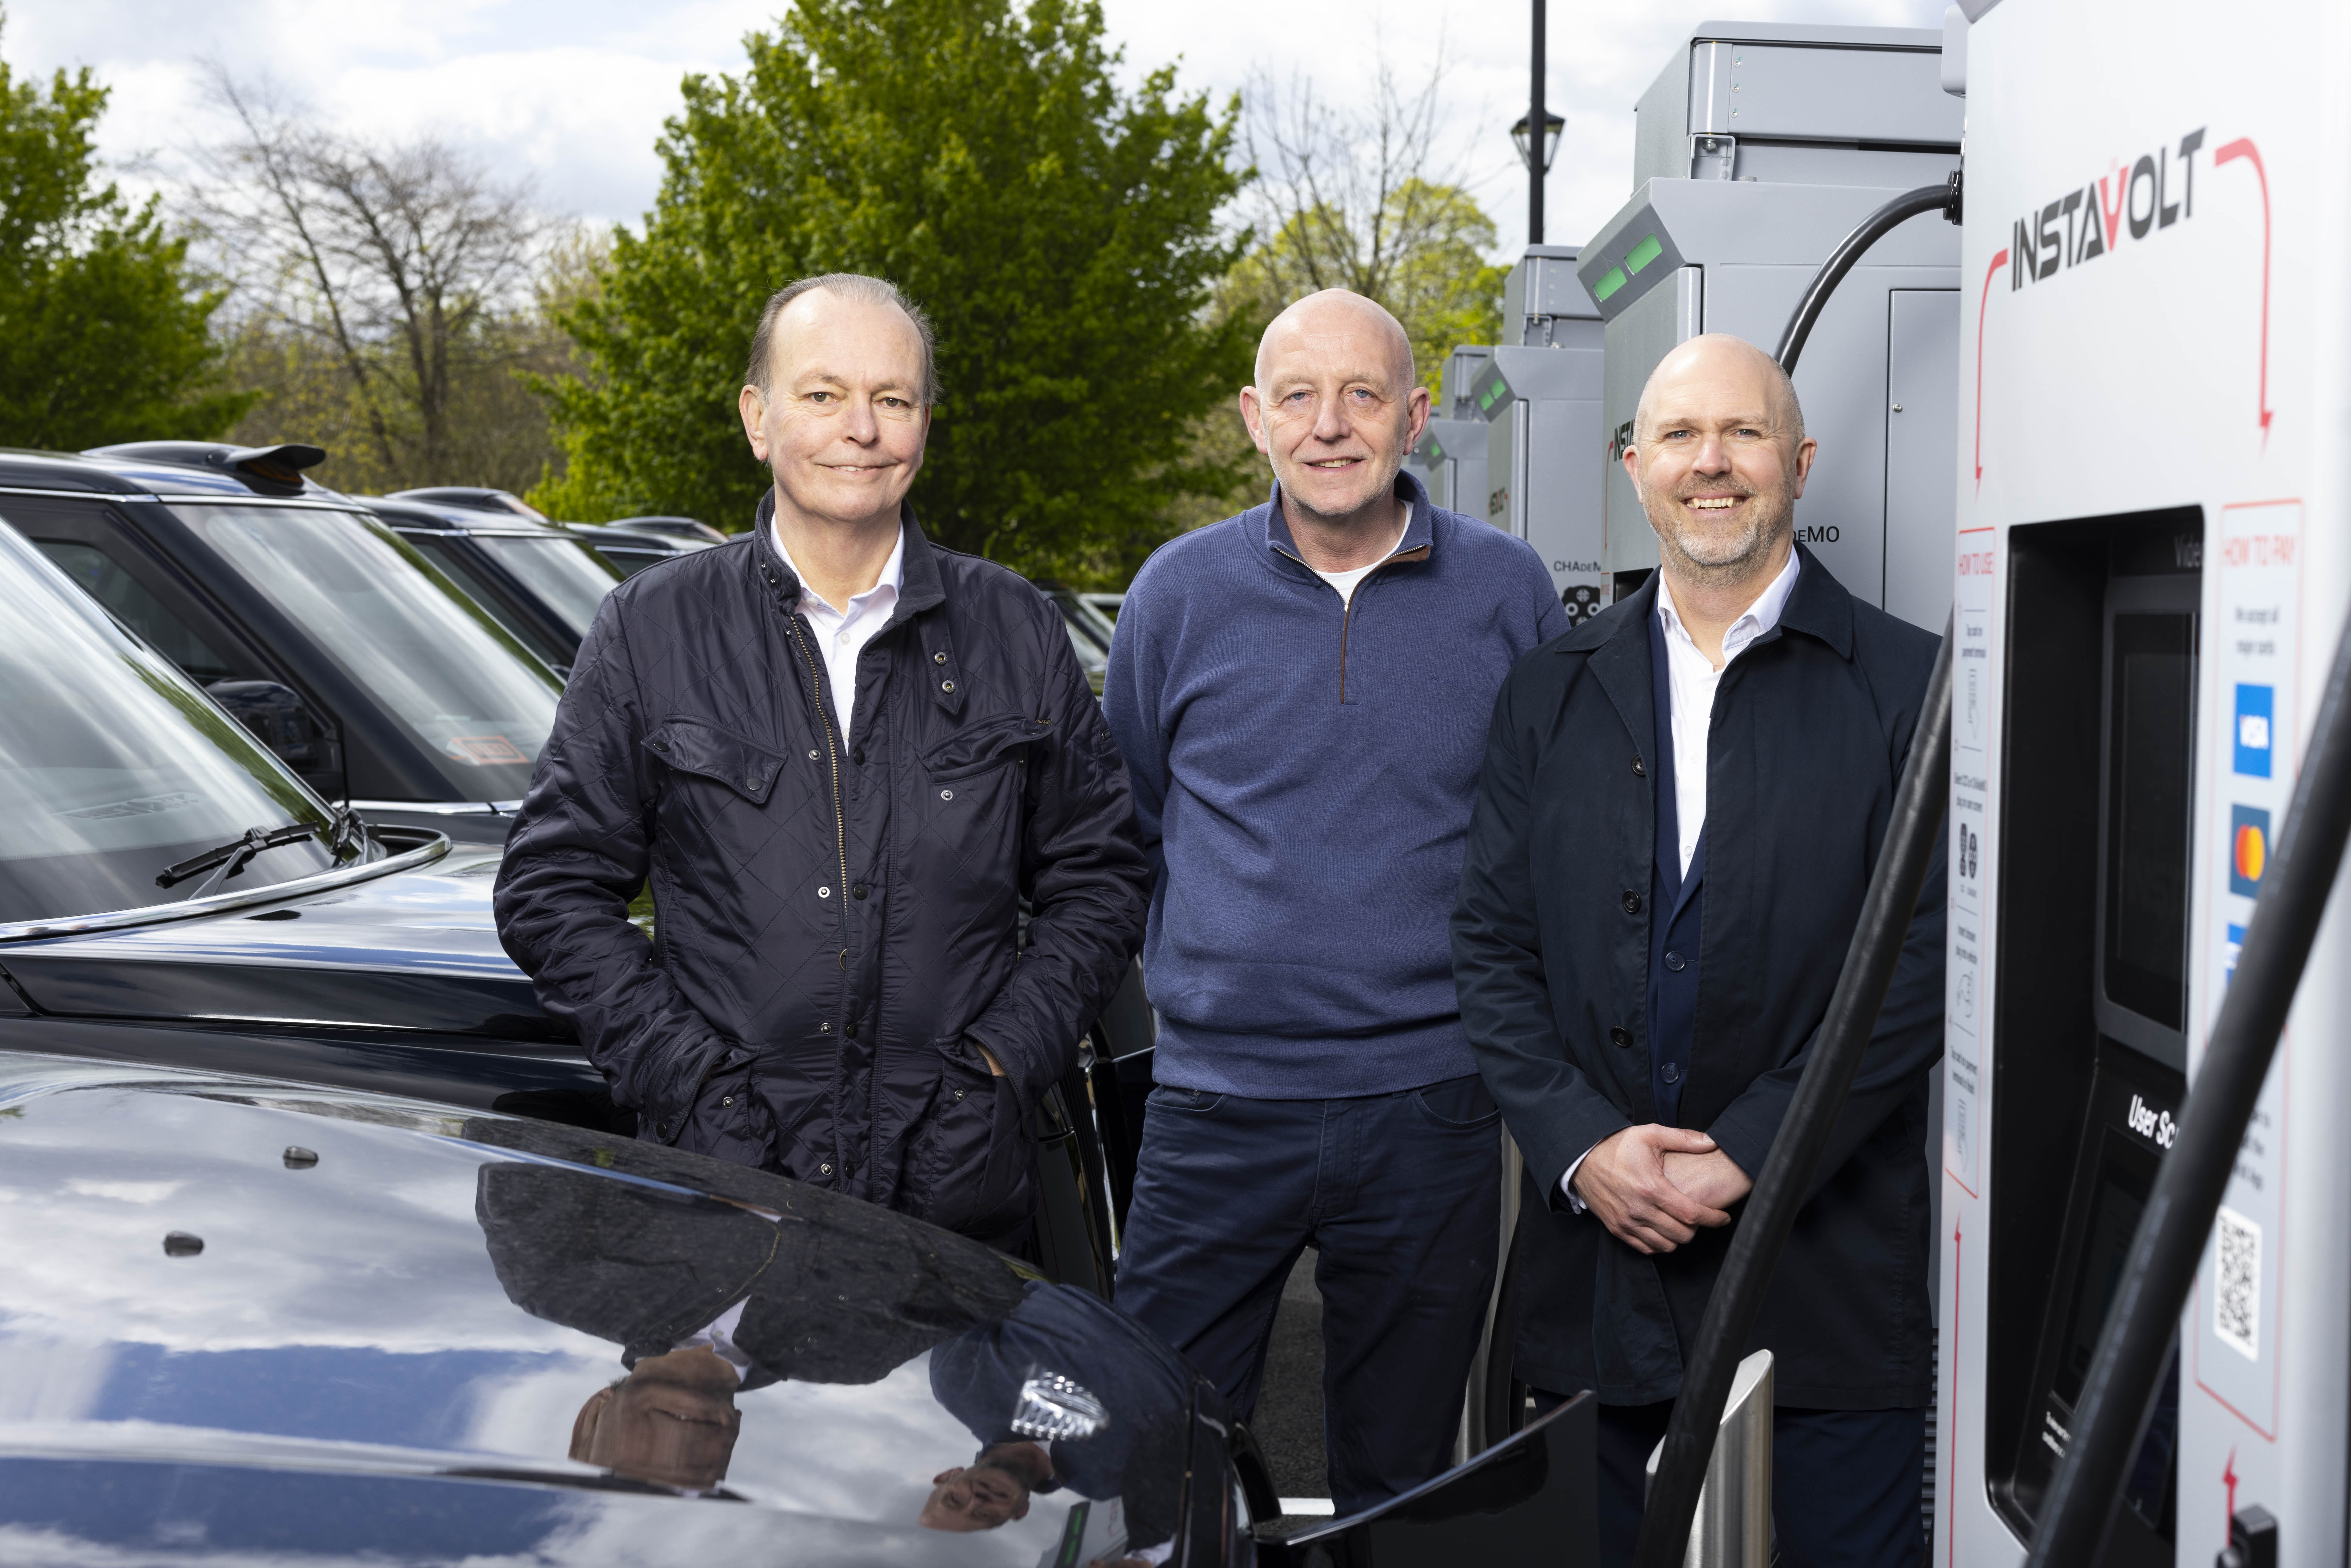 Left to right: Quentin Willson, motoring journalist and transport campaigner, Steve McNamara, general secretary of Licenced Taxi Drivers Association and Simon Smith, Chief Commercial Officer, InstaVolt.